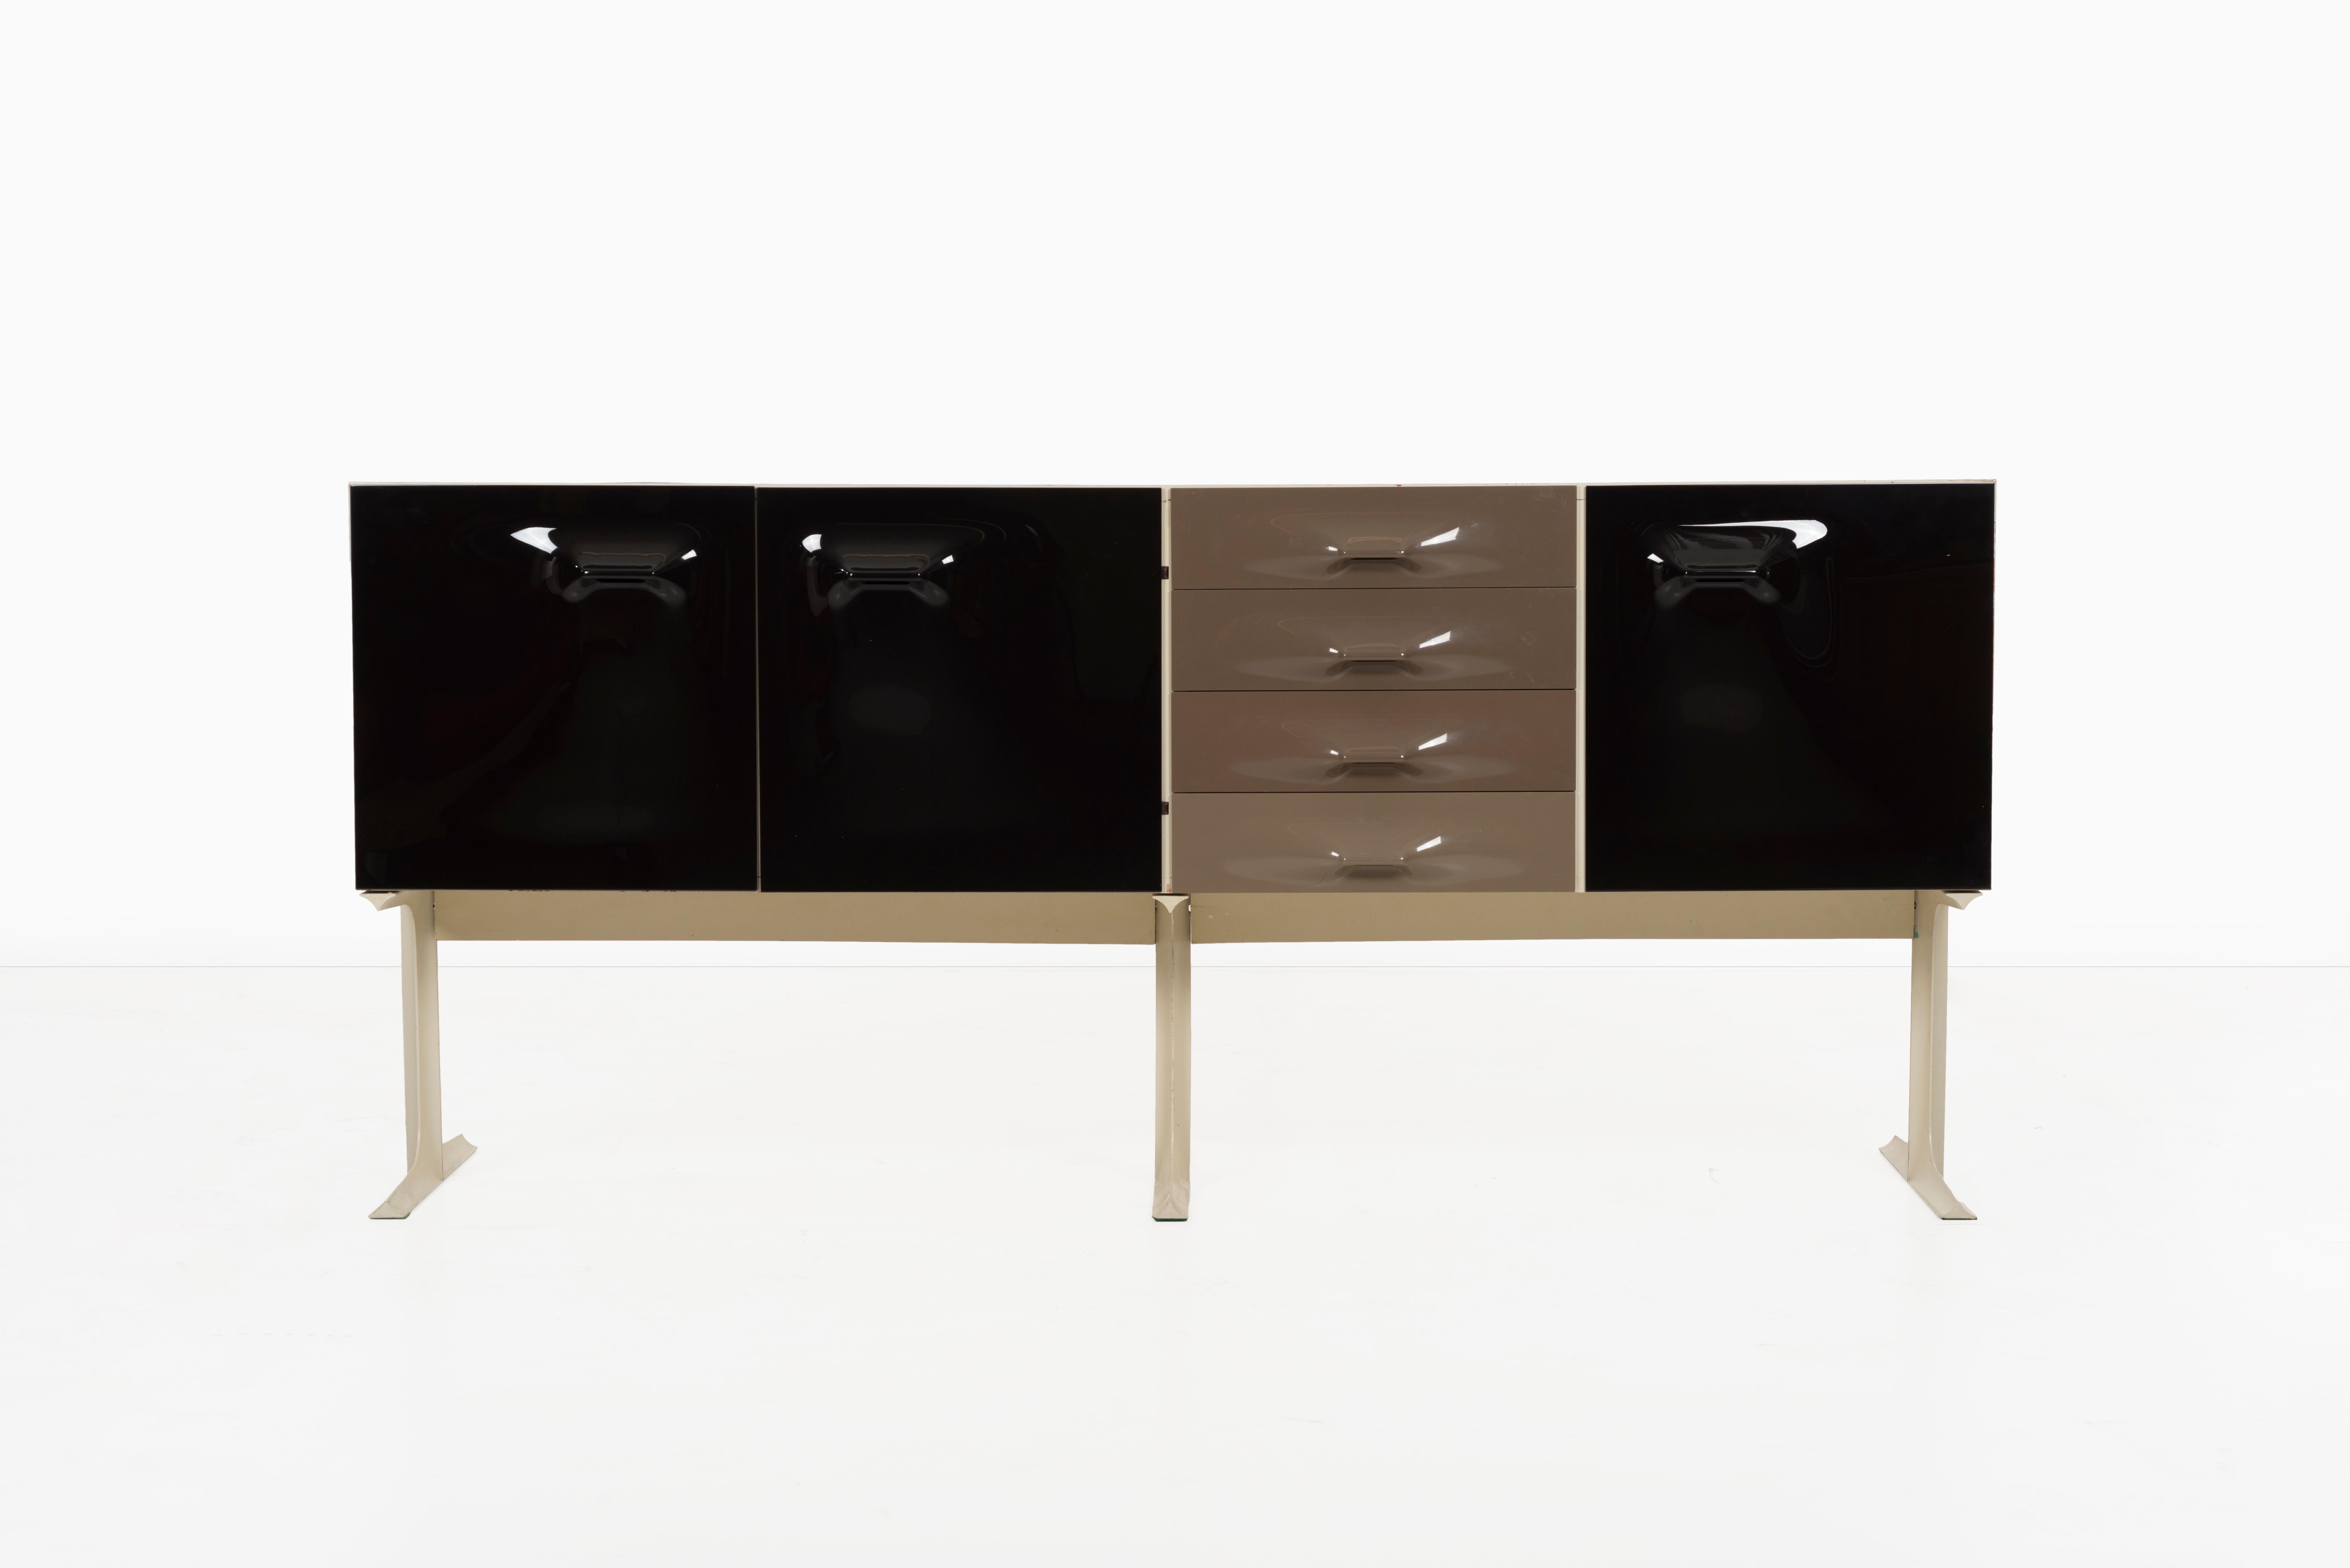 Loewy cabinet features 4 drawers and 3 doors concealing bottle storage, four drawers and two shelves. Paper manufacturer's label to interior ‘DF 2000 Made in France’.